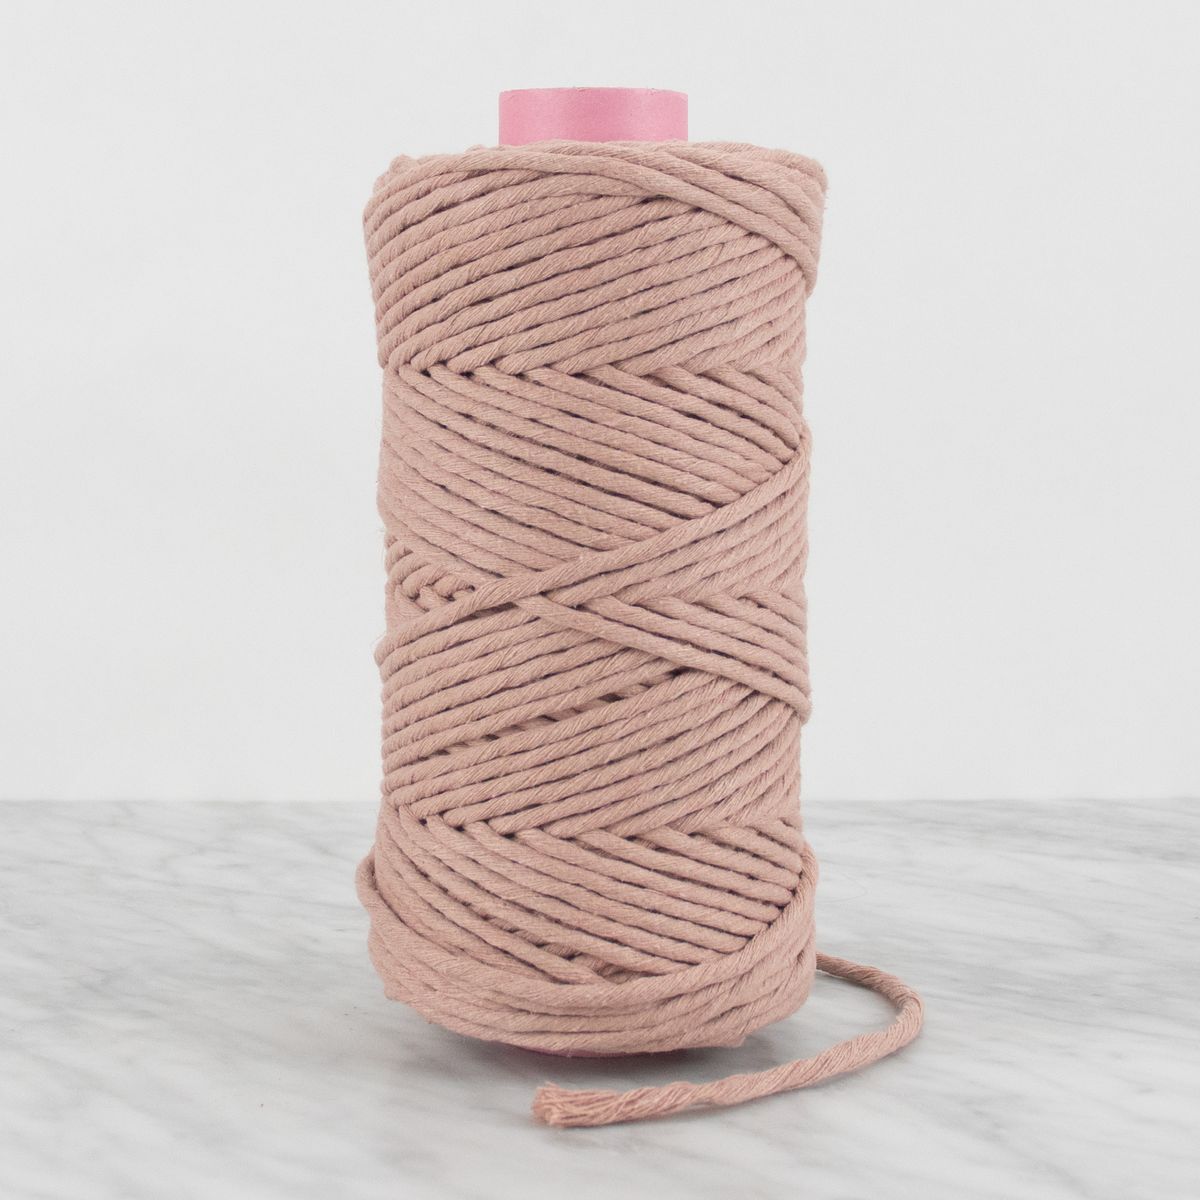 5mm Recycled Cotton String 0.5 kg - Antique Peach